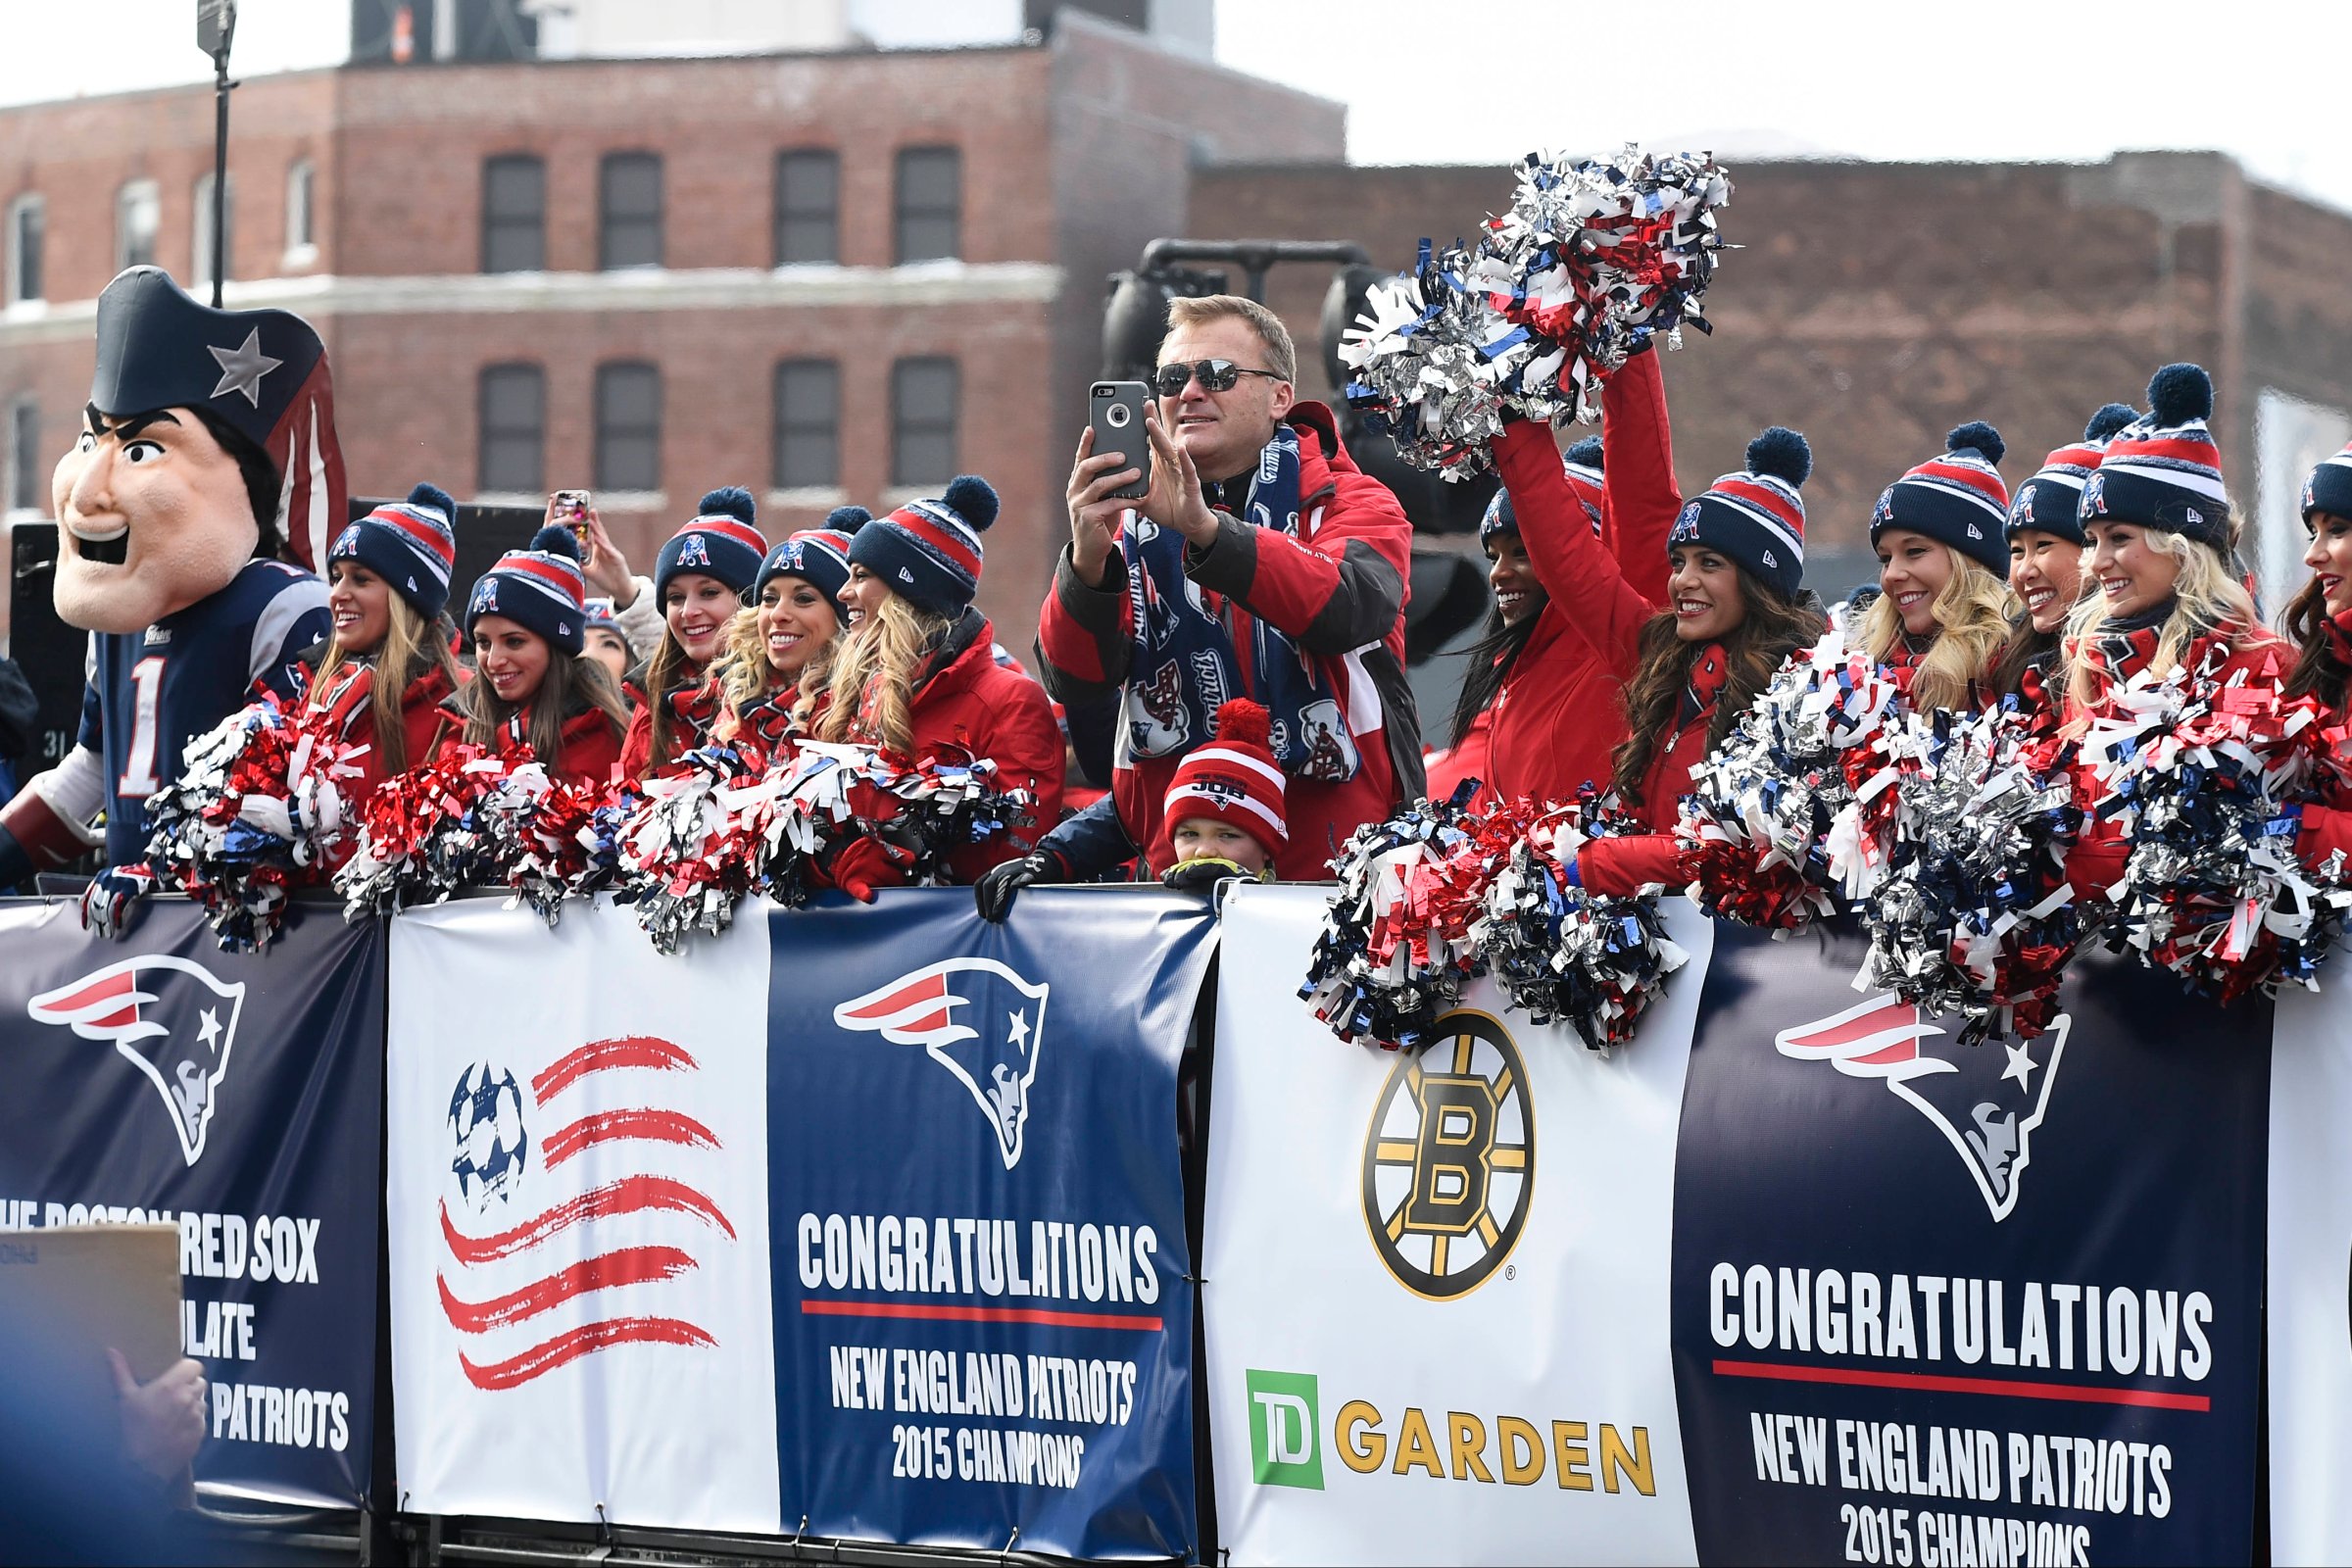 Former New England Patriot Scott Zolack rides with the cheerleaders during a parade held in Boston to celebrate the team's victory over the Seattle Seahawks in Super Bowl XLIX on February 4, 2015.